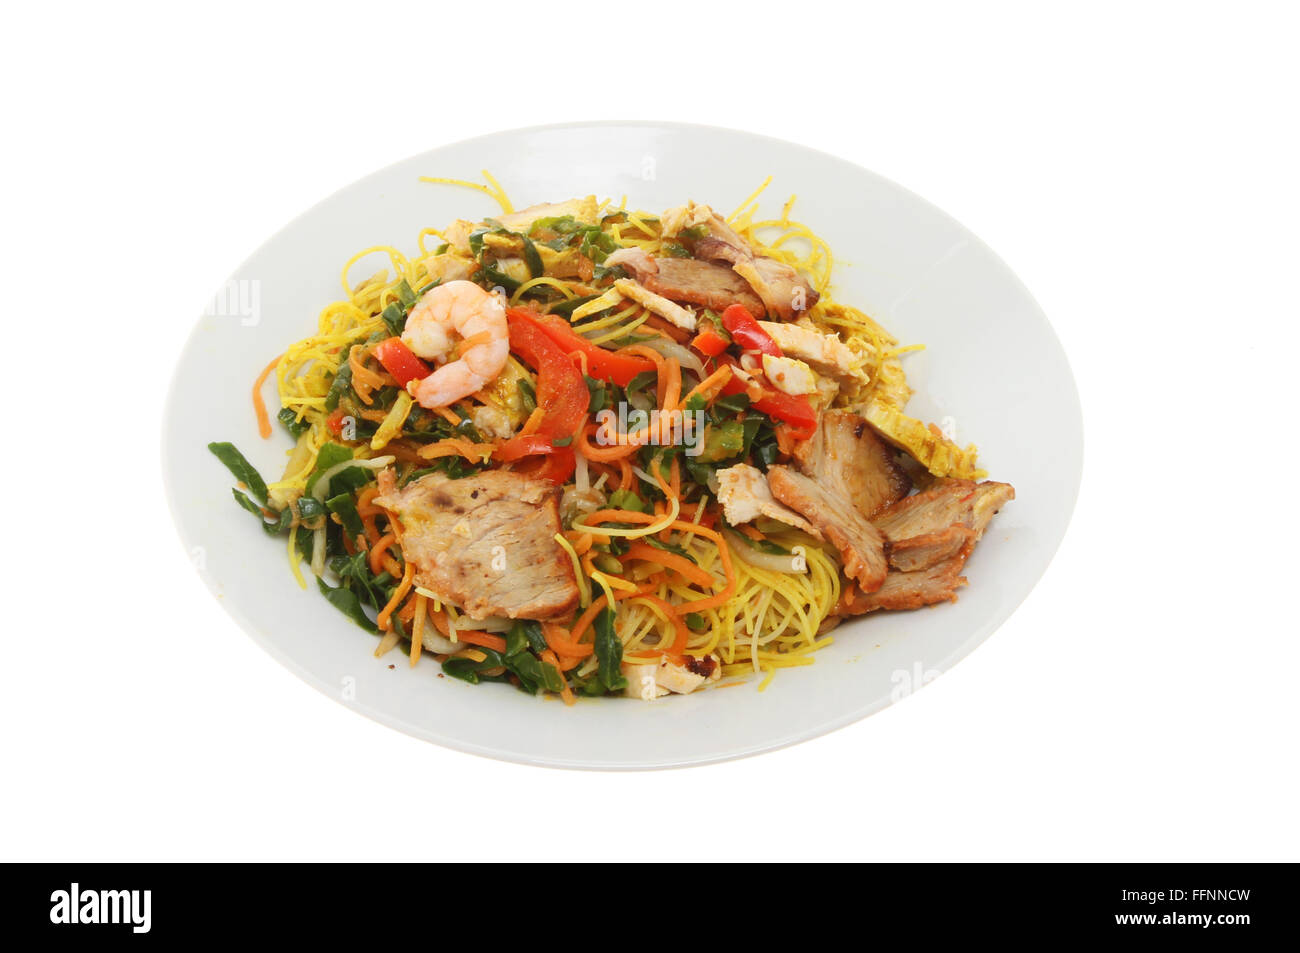 Chinese meal, Singapore noodles in a bowl isolated against white Stock Photo